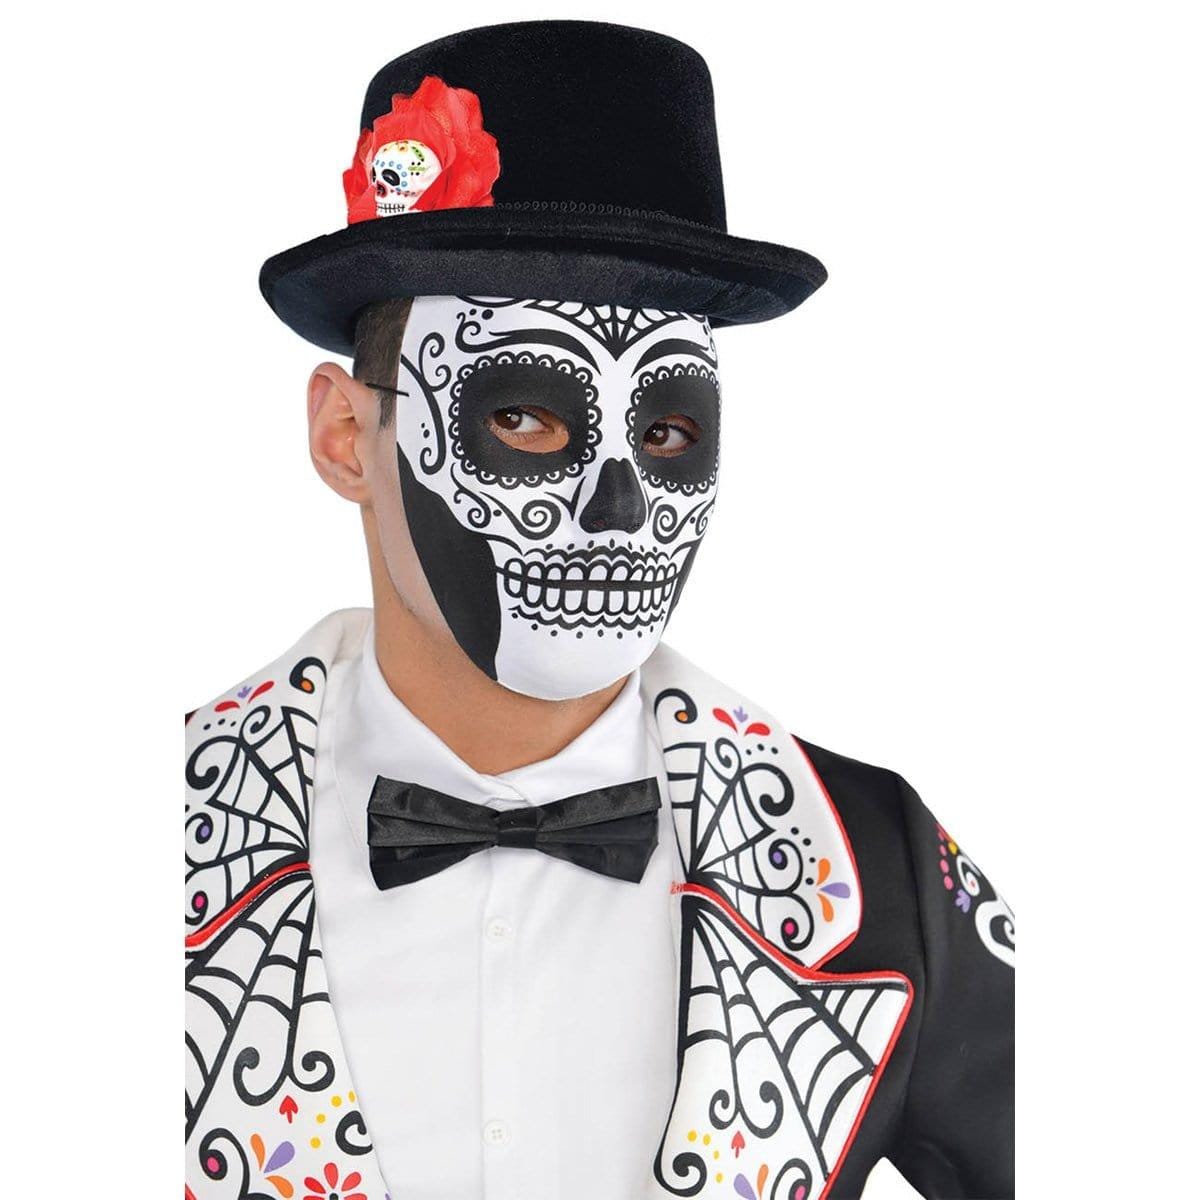 Buy Costume Accessories Day of the dead mask sold at Party Expert